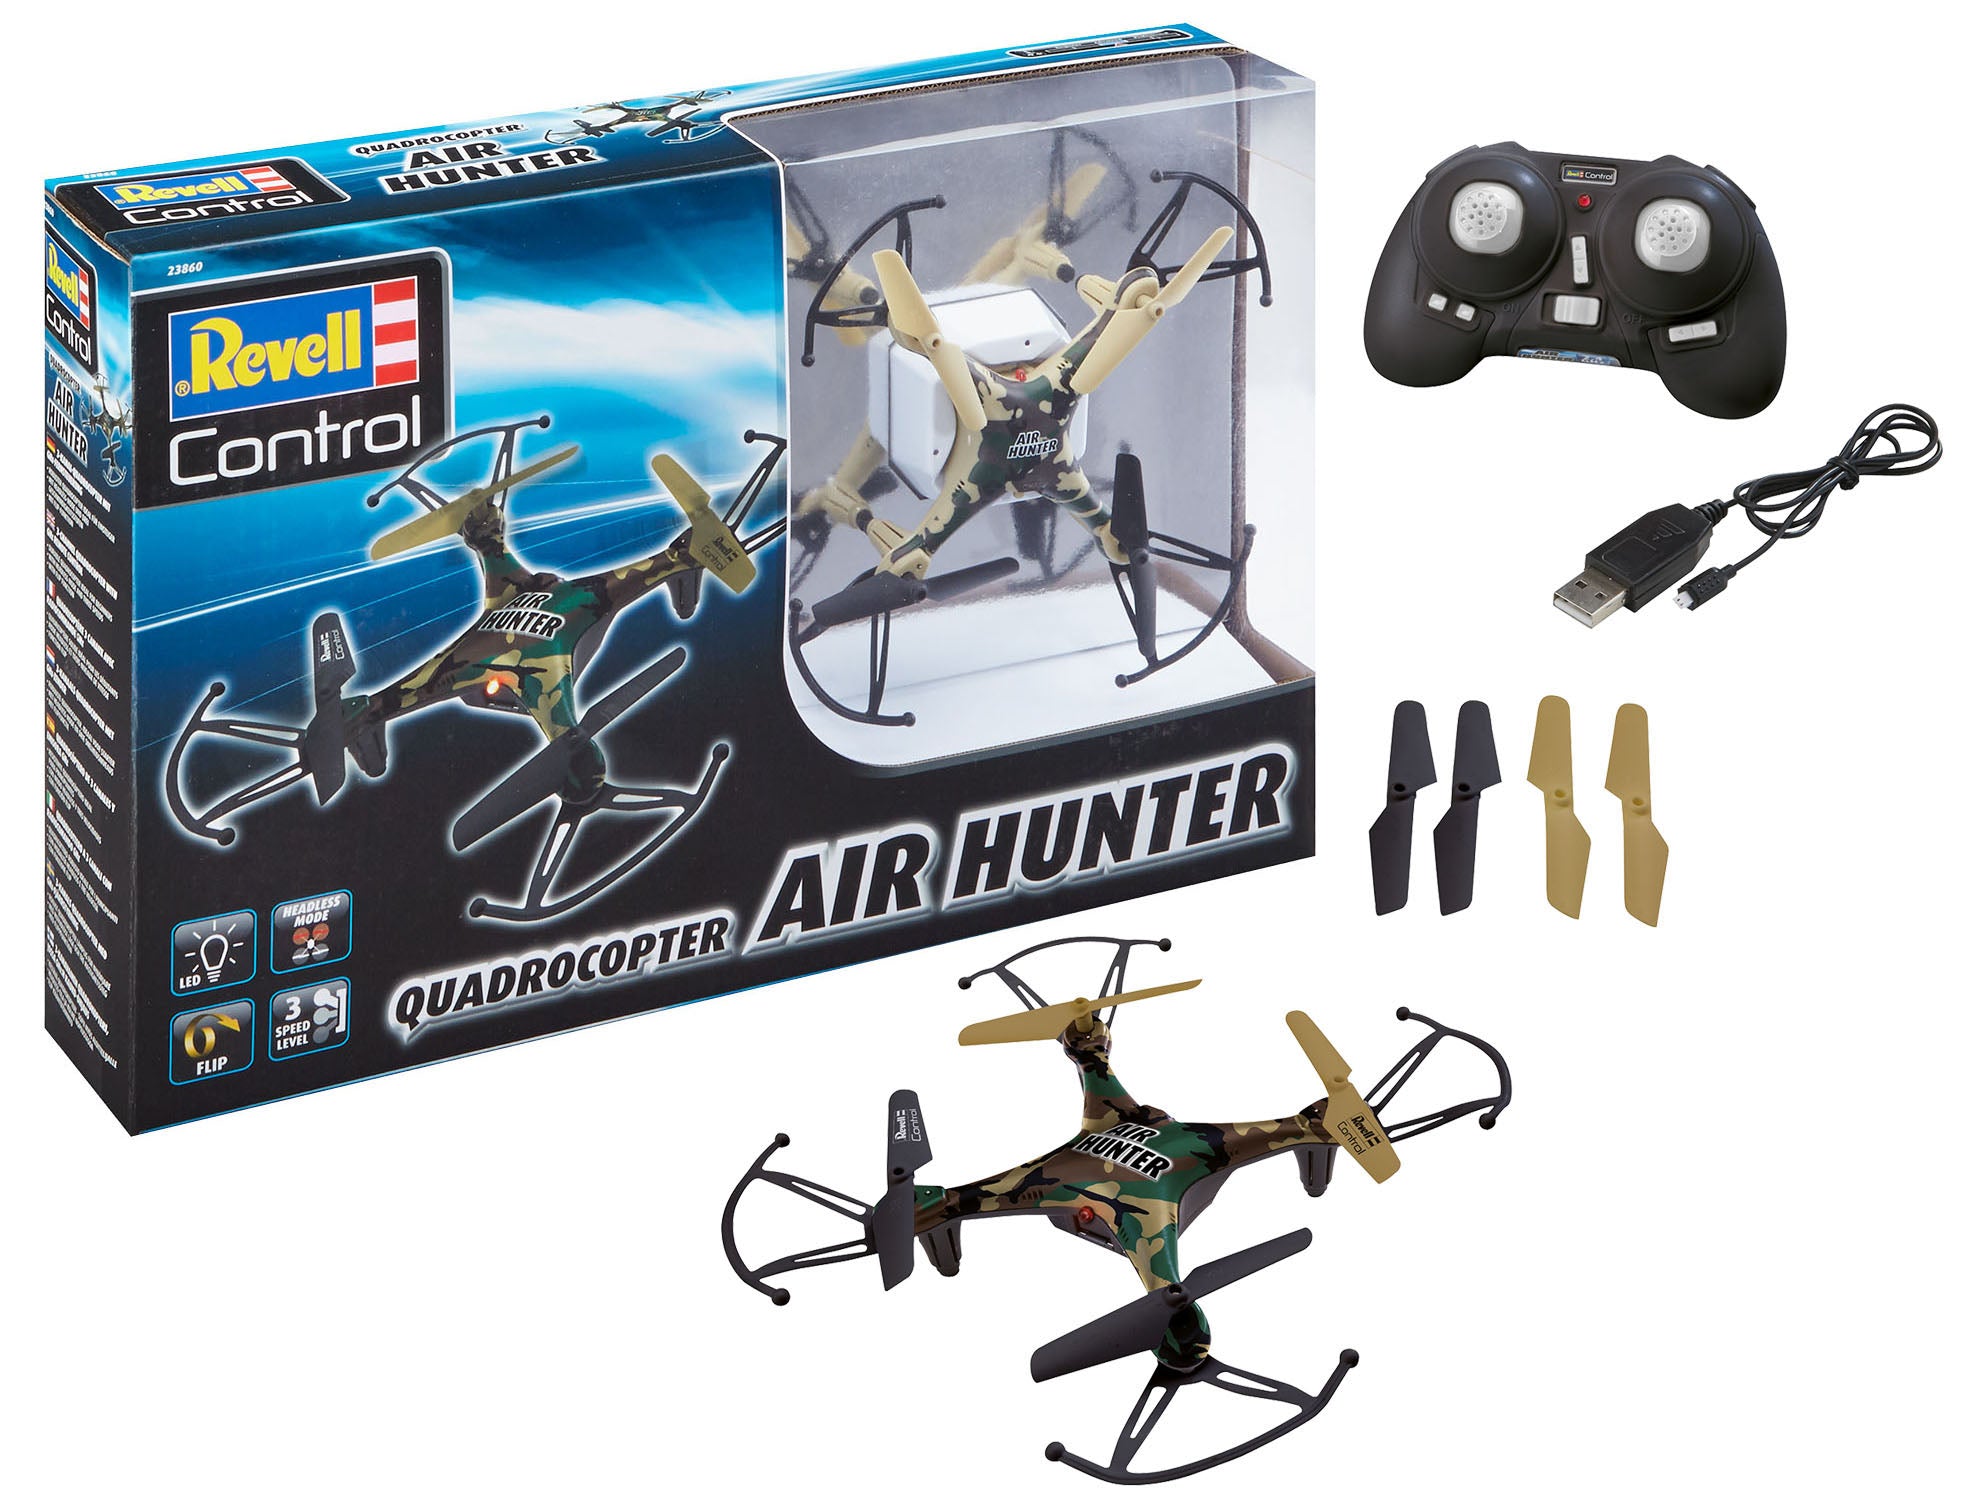 Radio Control Helicopter Revell RC Quadrocopter Air Hunter